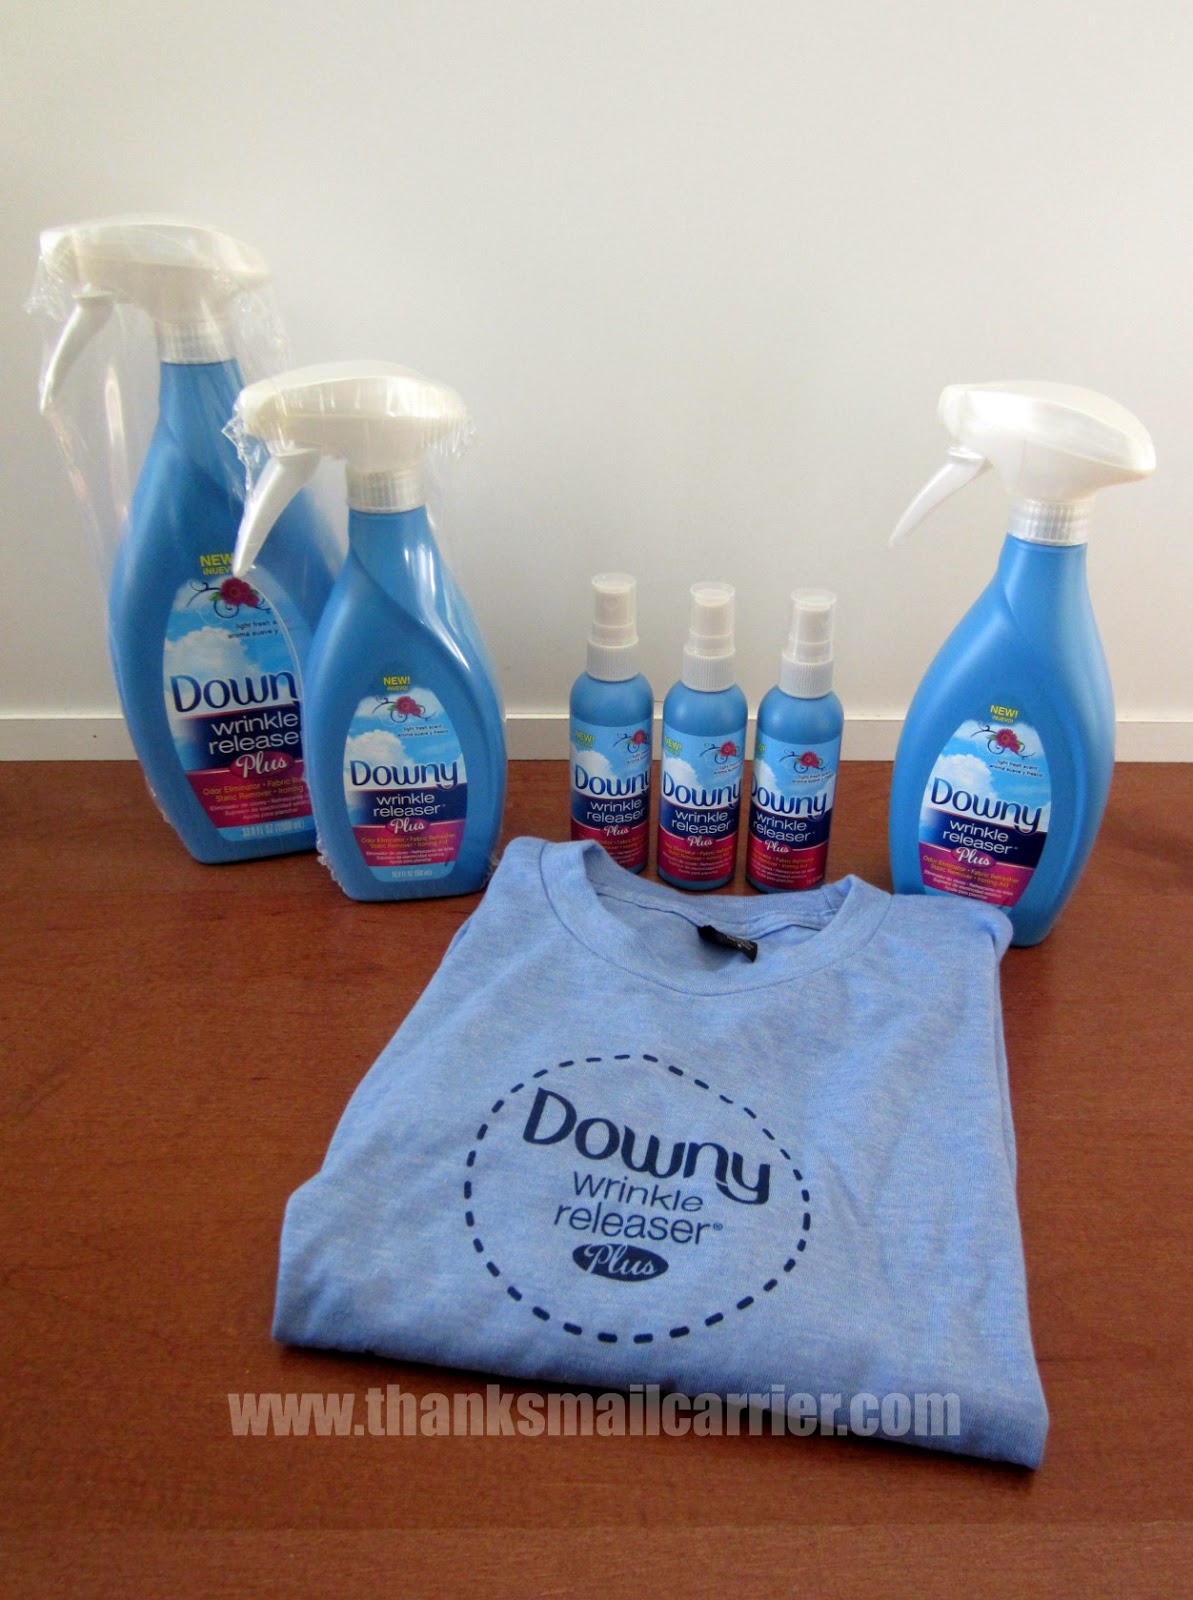 Downy Wrinkle Releaser Plus review